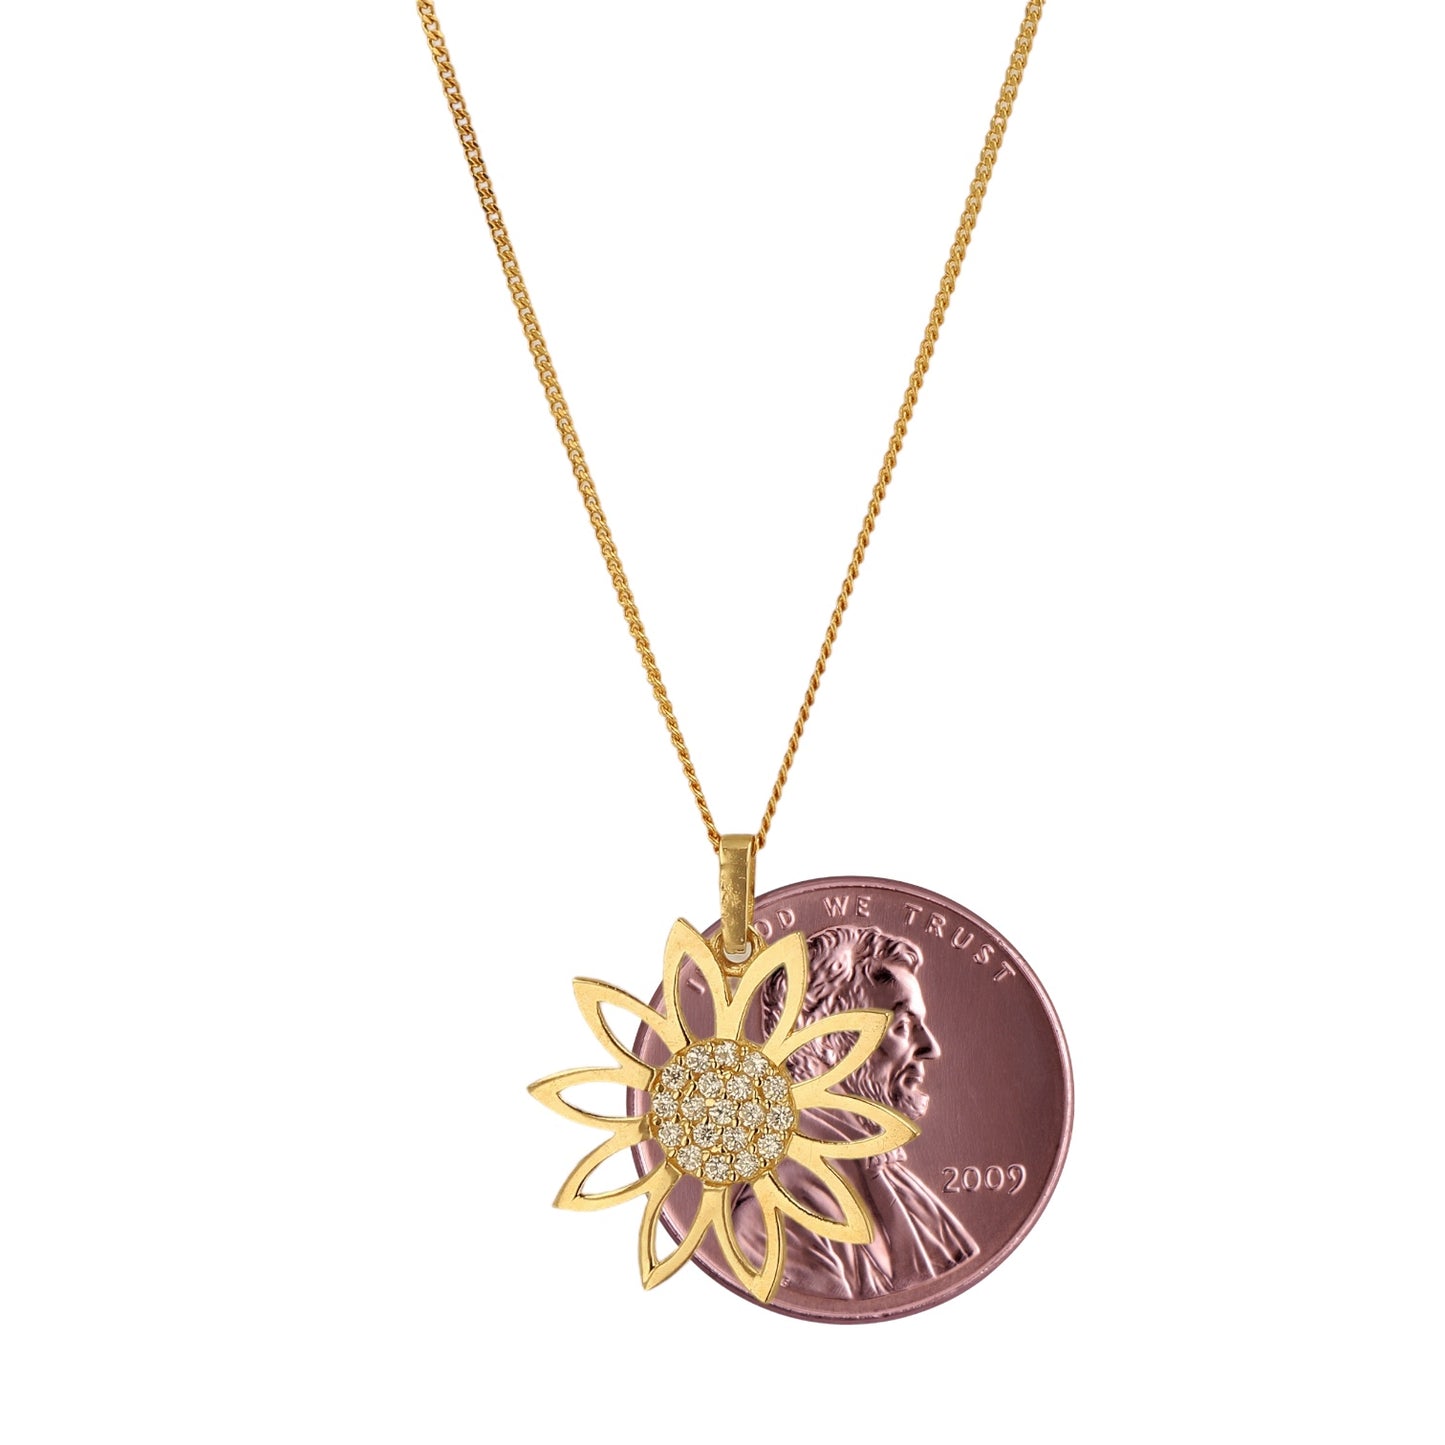 10k yellow gold Chain and flower pendant set